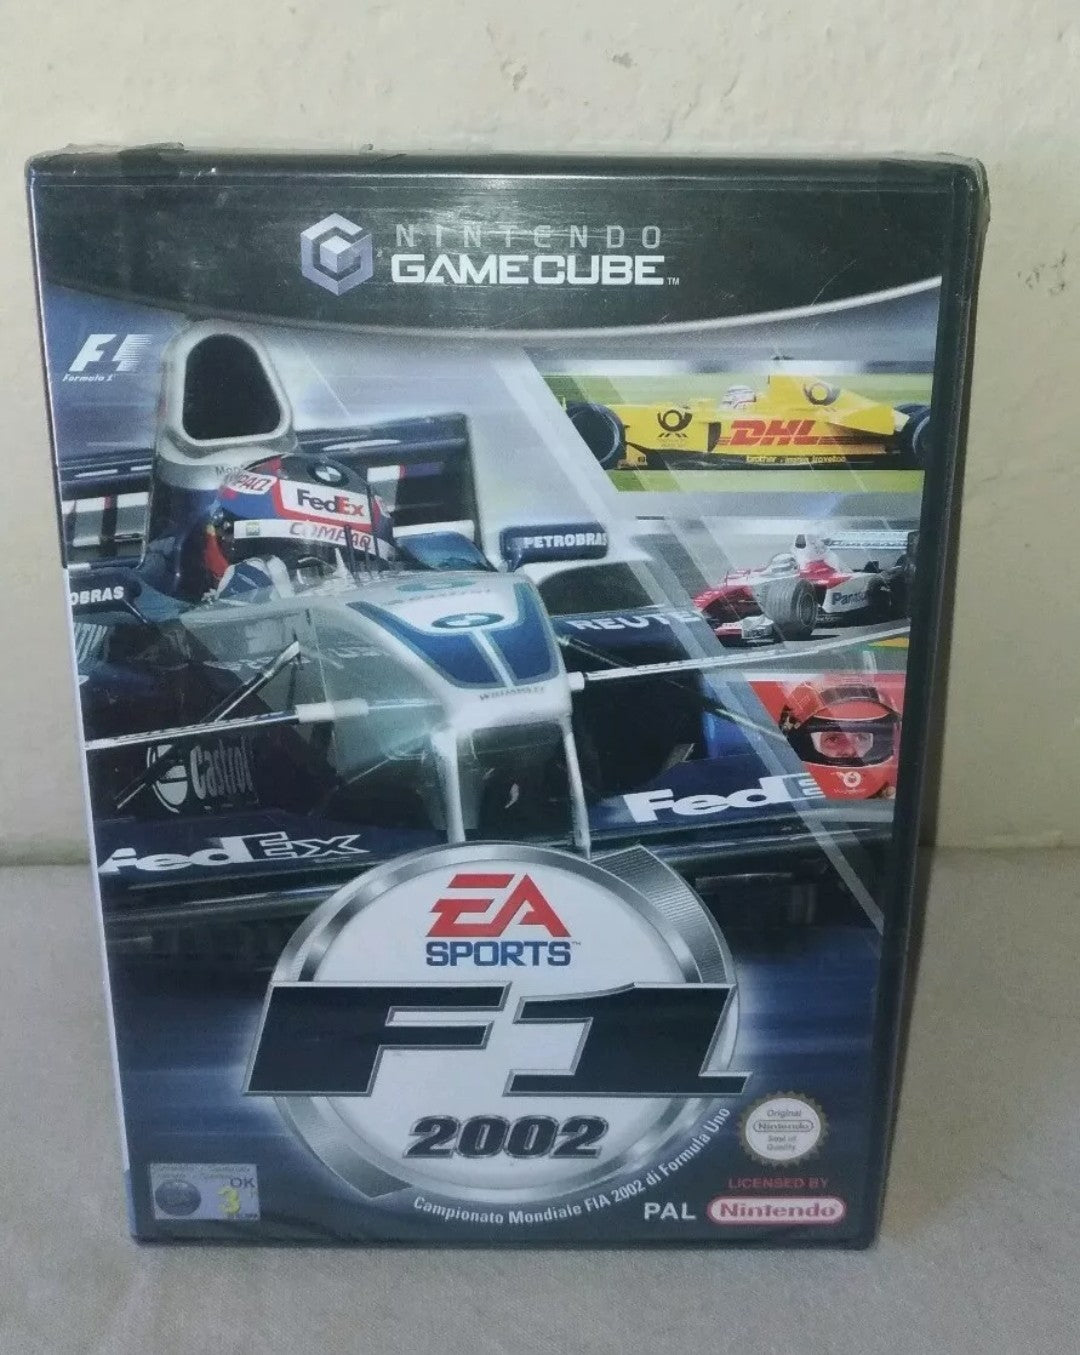 F1 2002 video game for Nintendo Gamecube, sealed